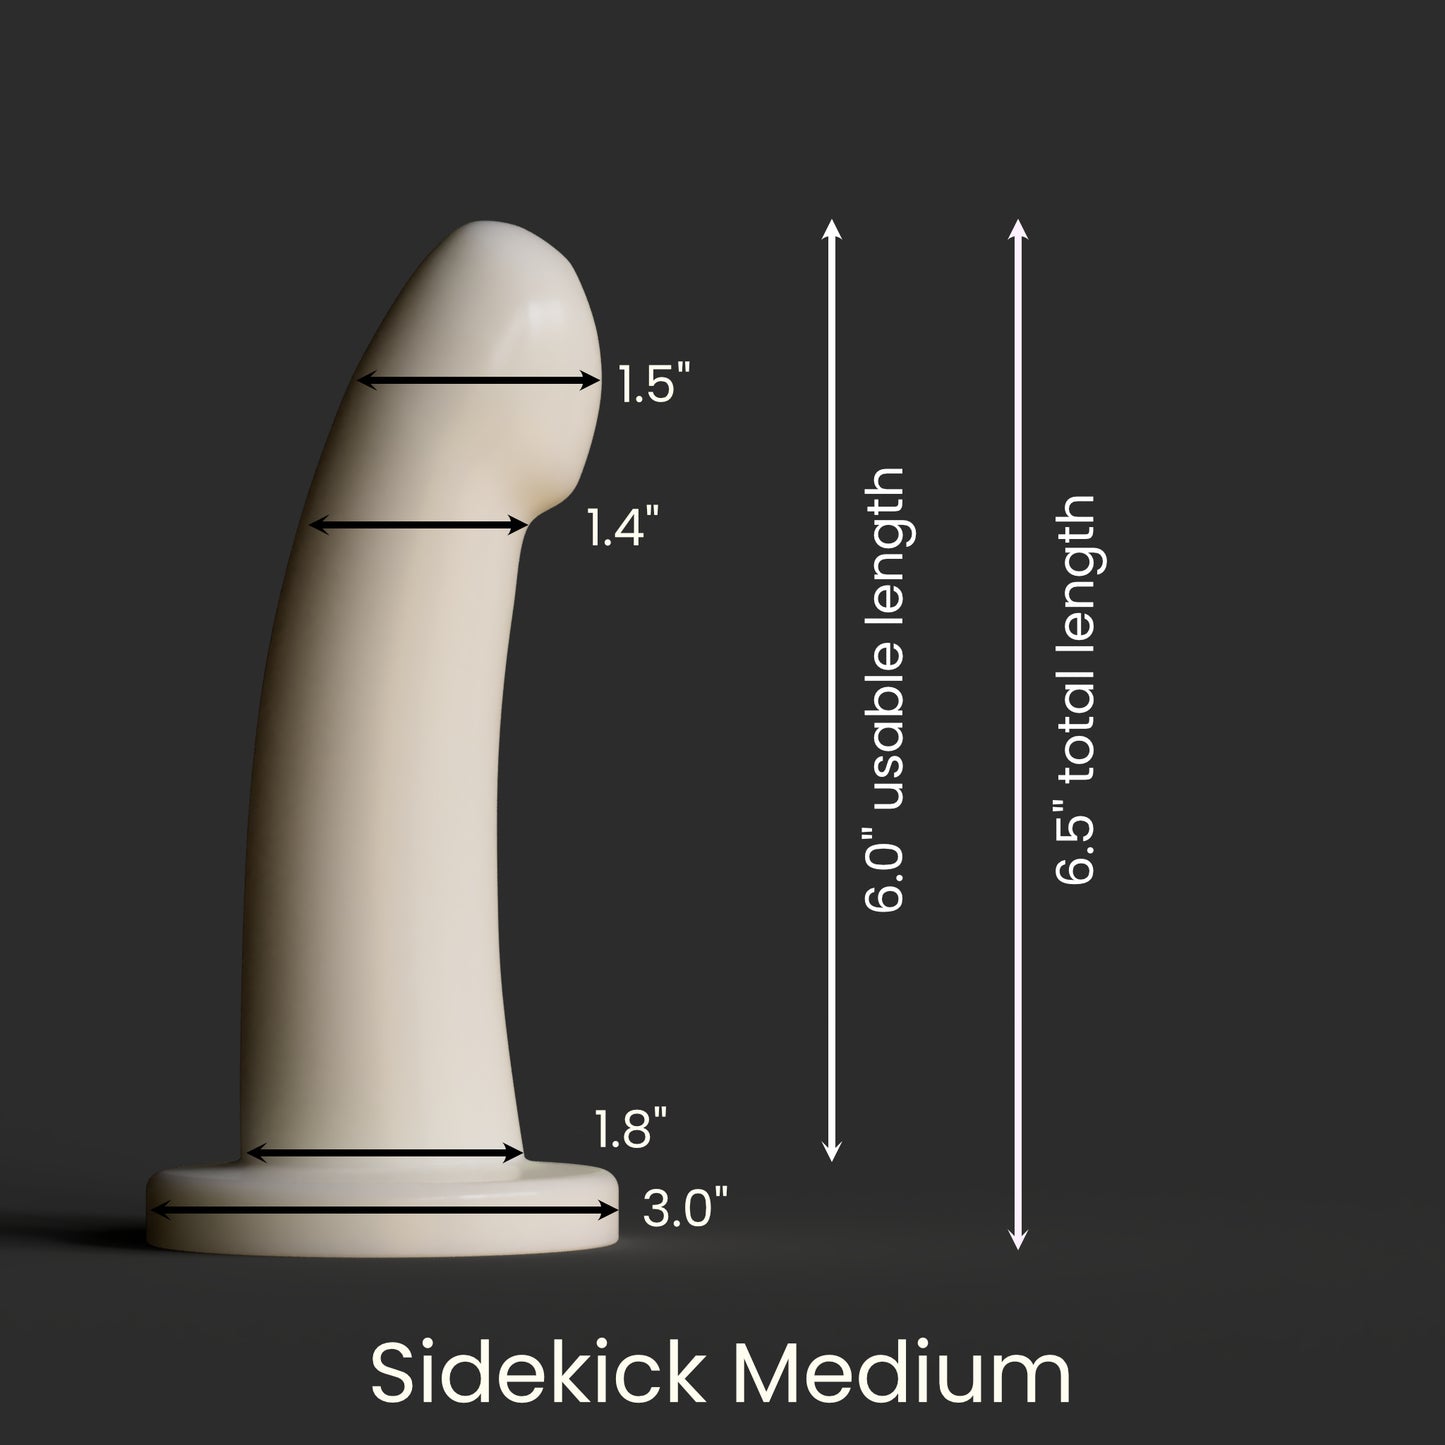 Diagram showing the dimensions of the Sidekick M as described in the product description.